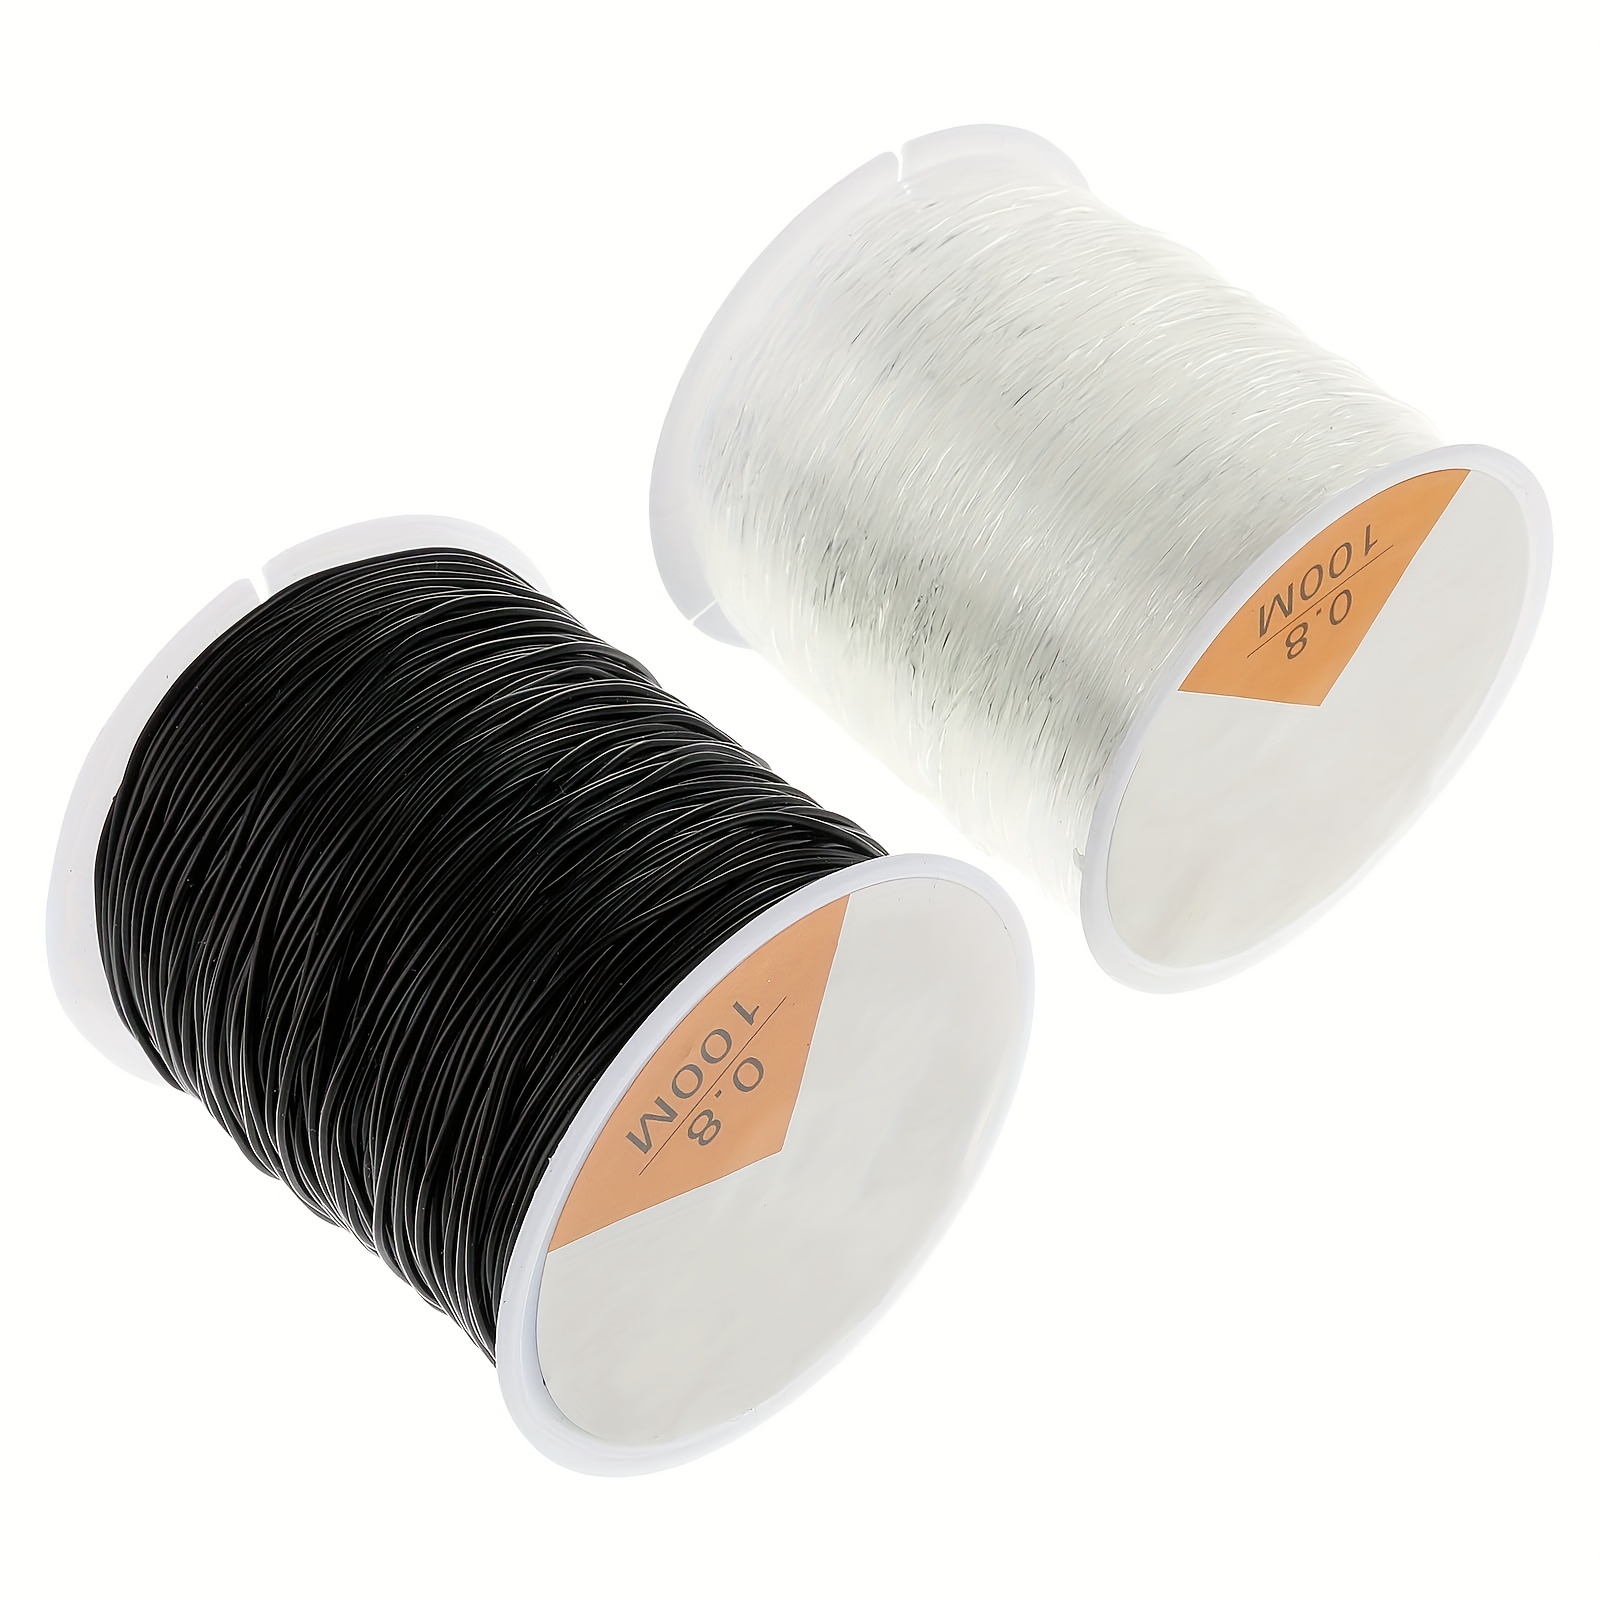 Double Roll Black And White 0.8mm Crystal Elastic Fishing Line For Jewelry  Making DIY Bracelet Necklace Beading Line